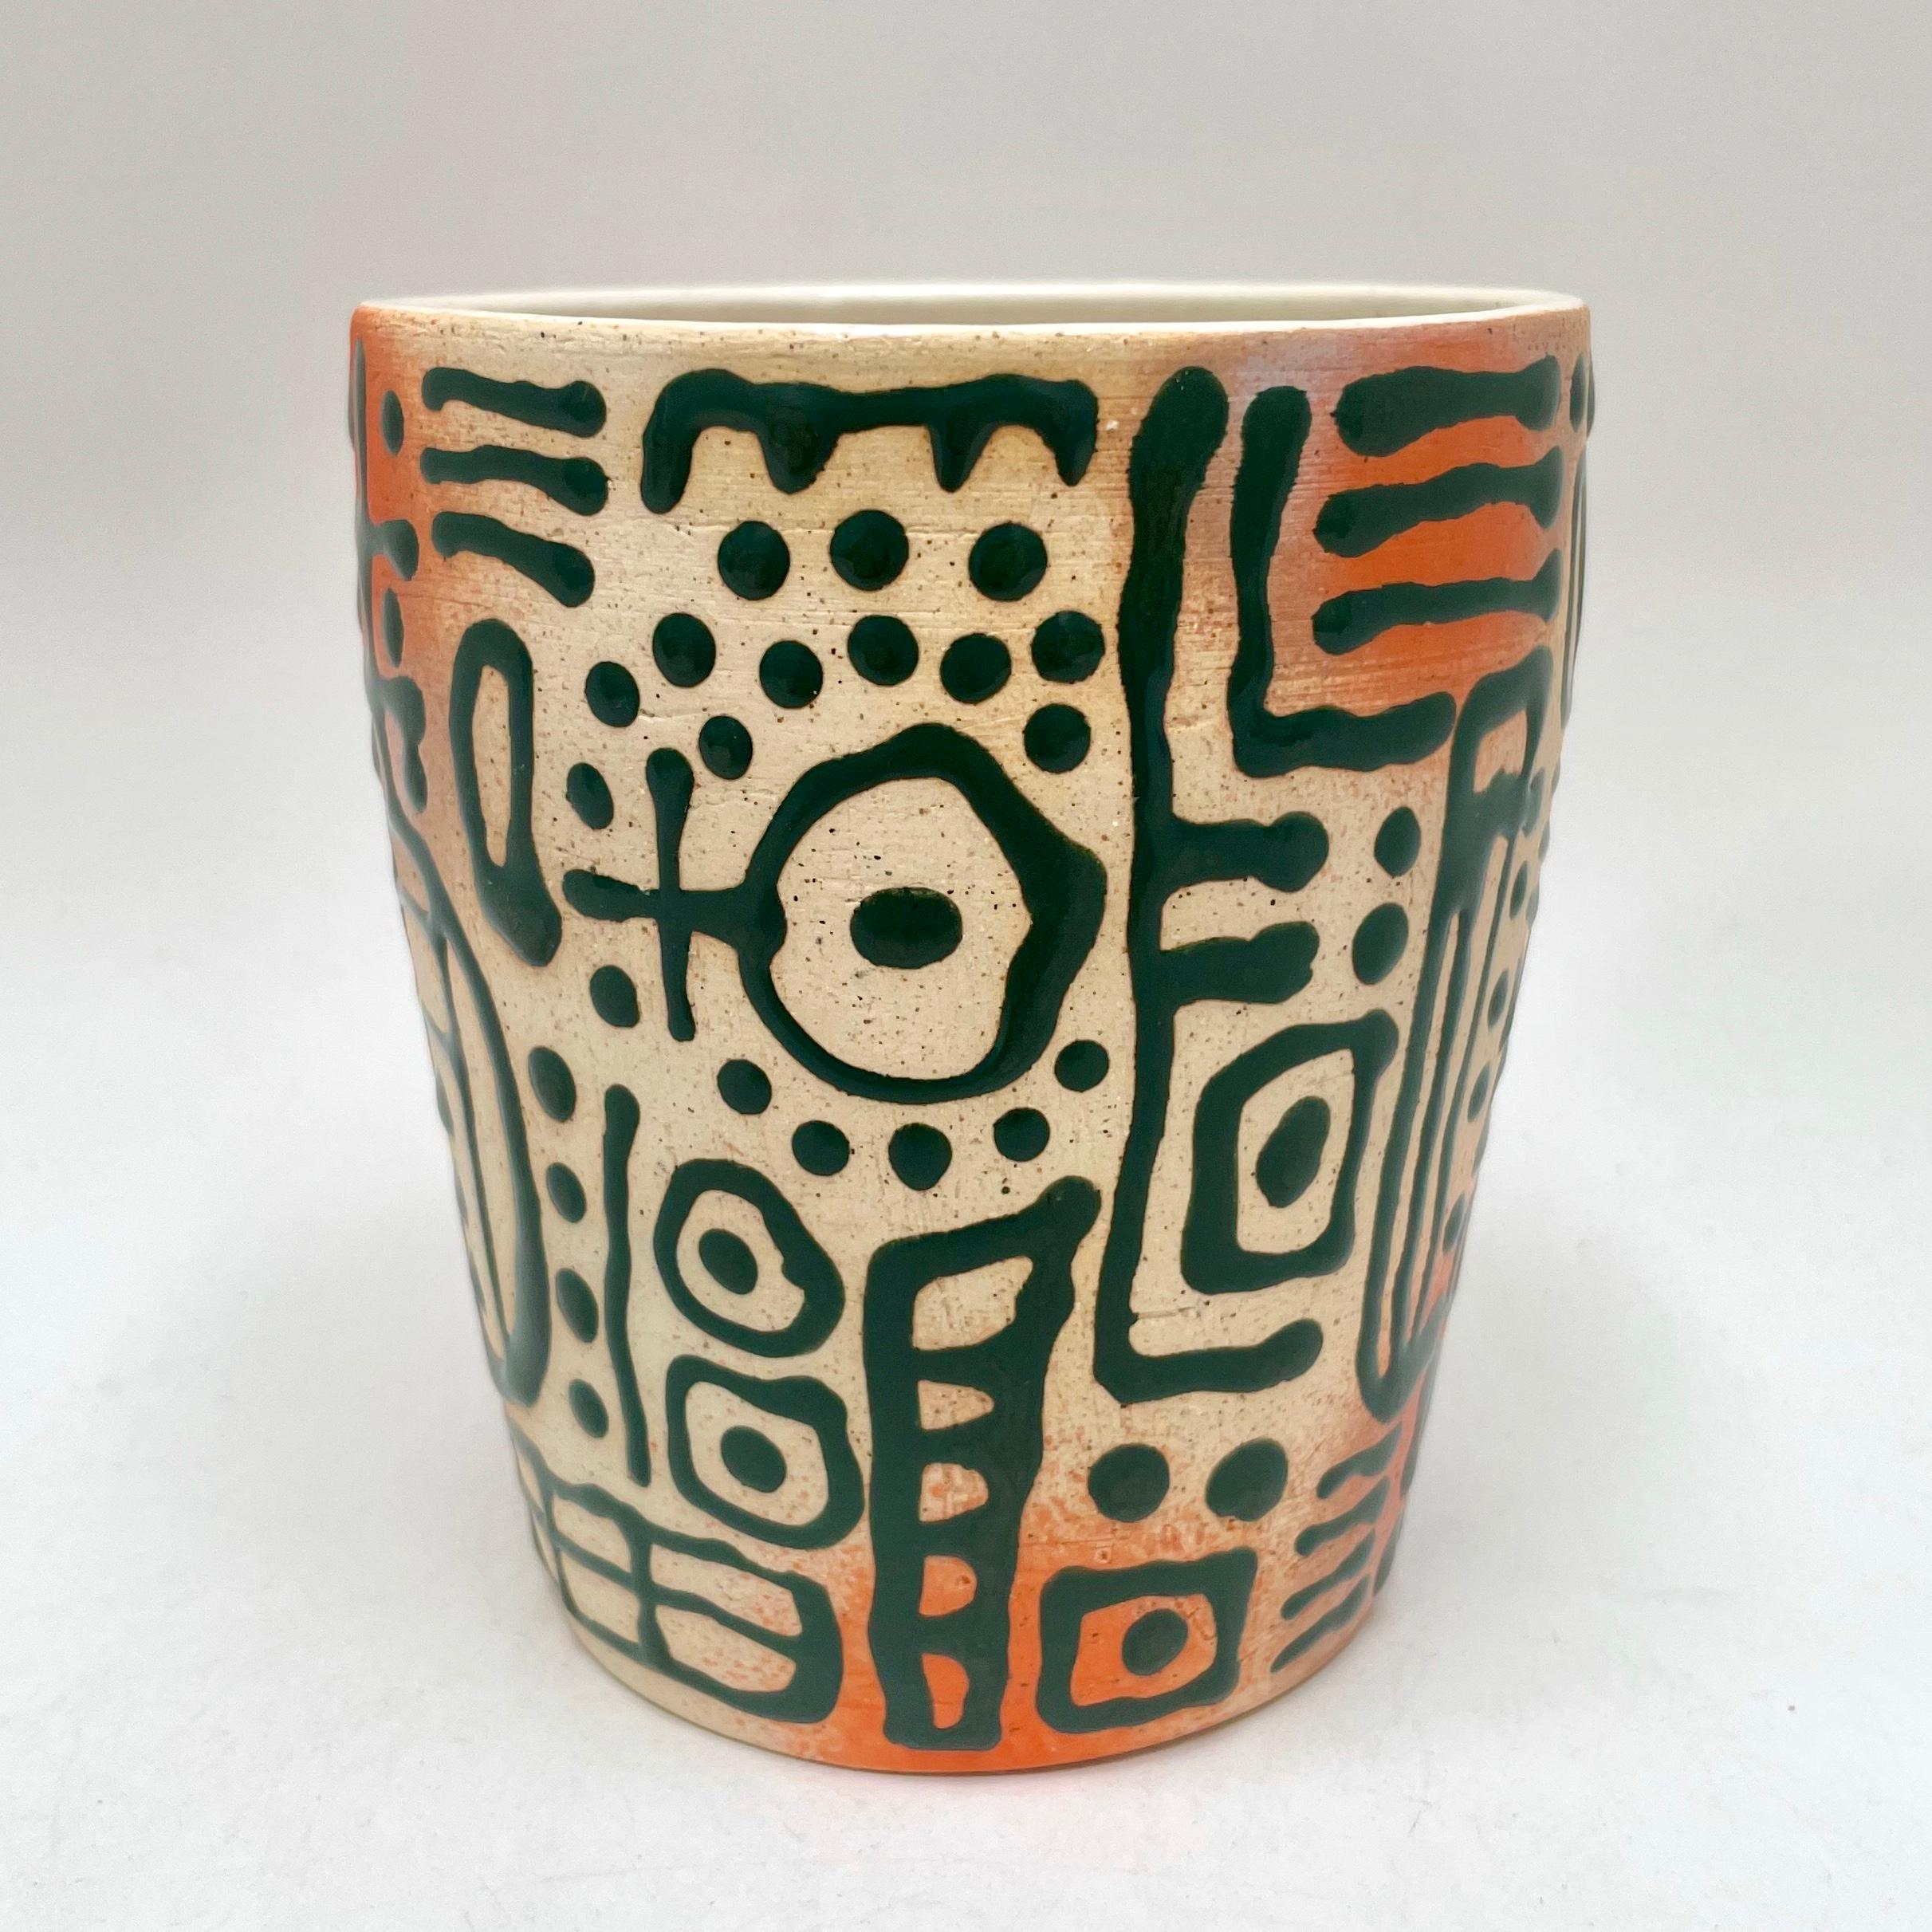 The Glyph Tumbler, shown here in embossed Blugreen/Various Colors, the food safe vessel for your favorite beverage of choice, entertaining, or as a decorative object or object d'art. Versatile, sustainable and one of kind, made of recycled stoneware